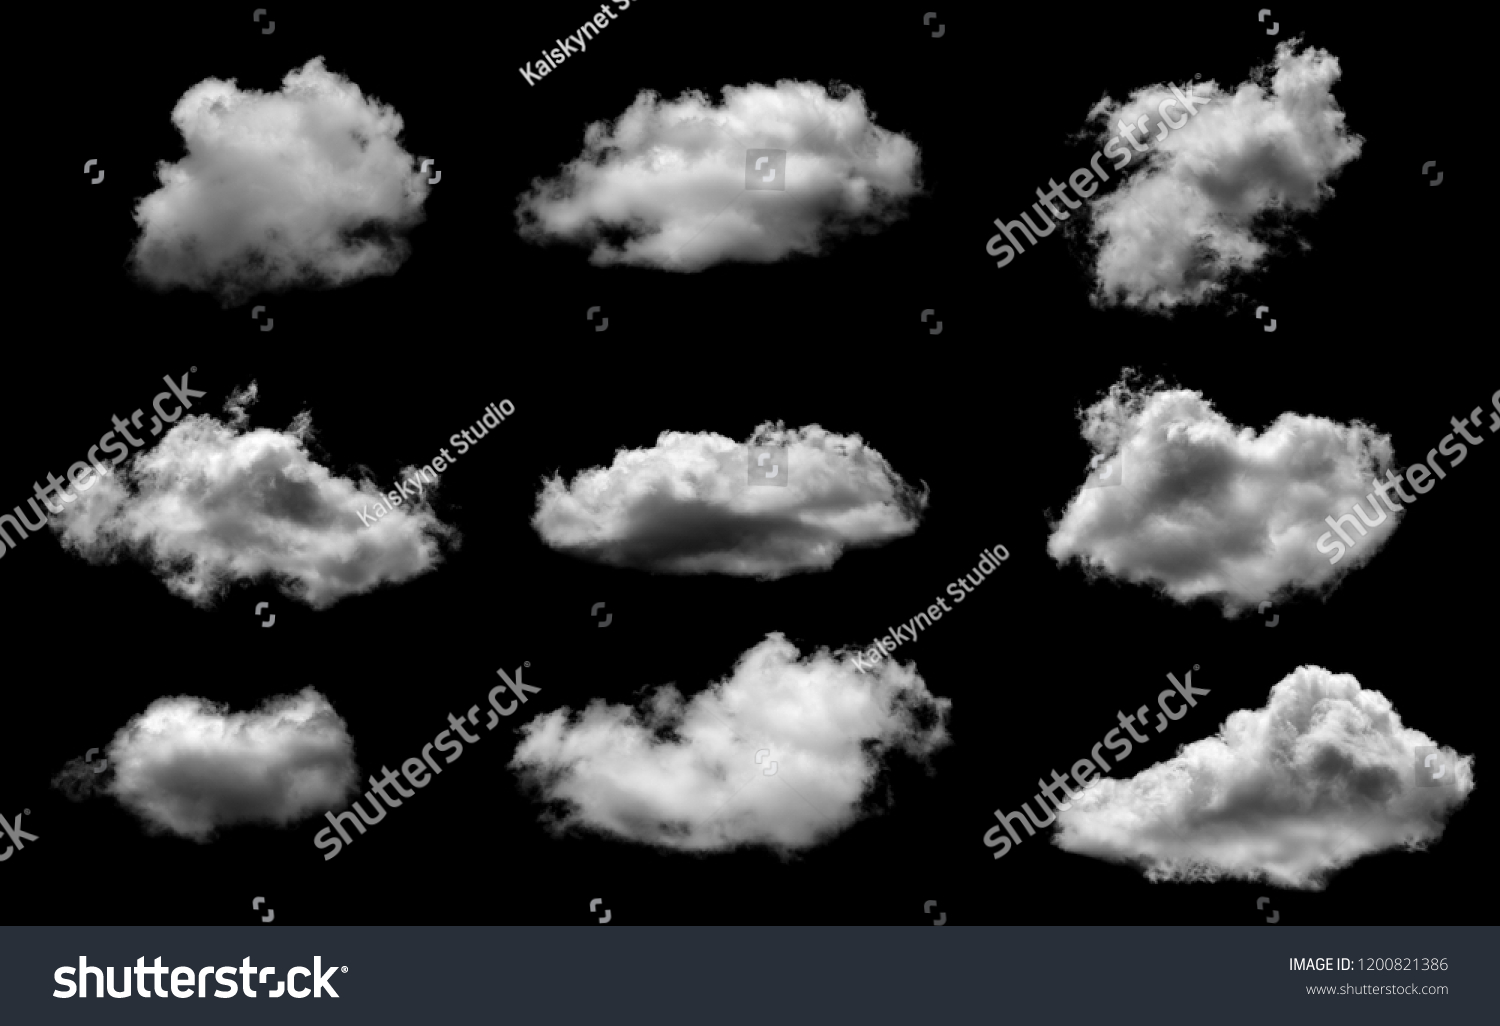 Collections of separate white clouds on a black background have real clouds. White cloud isolated on a black background realistic cloud. white fluffy cumulus cloud isolated cutout on black background #1200821386